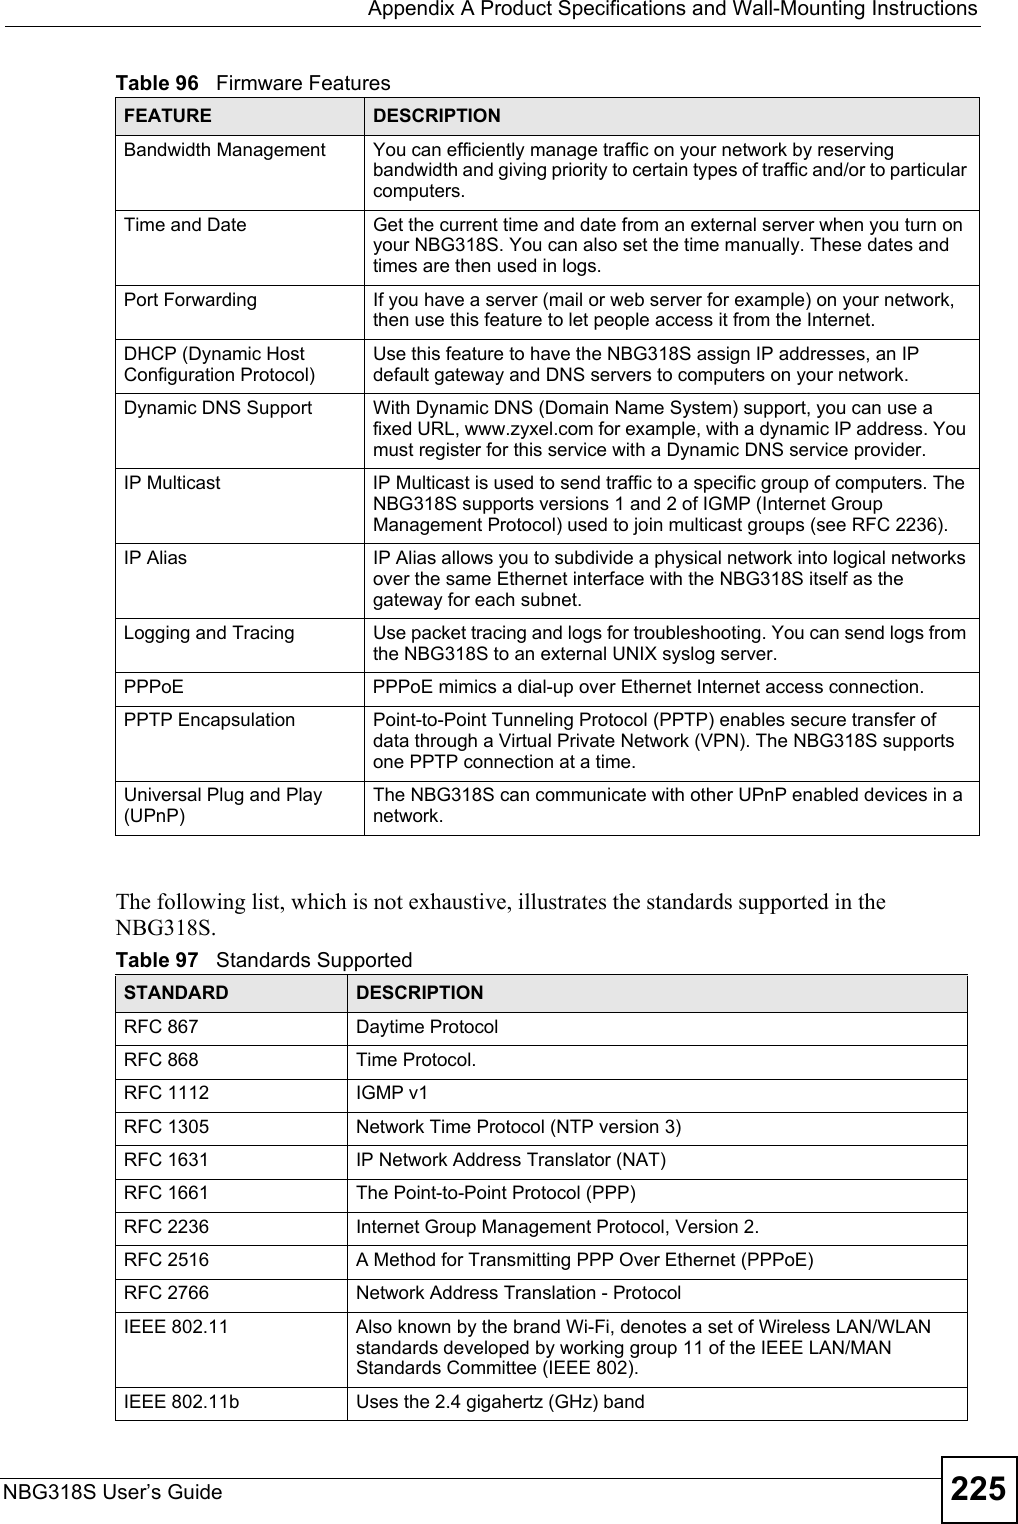  Appendix A Product Specifications and Wall-Mounting InstructionsNBG318S User’s Guide 225The following list, which is not exhaustive, illustrates the standards supported in the NBG318S.Bandwidth Management  You can efficiently manage traffic on your network by reserving bandwidth and giving priority to certain types of traffic and/or to particular computers.Time and Date Get the current time and date from an external server when you turn on your NBG318S. You can also set the time manually. These dates and times are then used in logs.Port Forwarding If you have a server (mail or web server for example) on your network, then use this feature to let people access it from the Internet.DHCP (Dynamic Host Configuration Protocol)Use this feature to have the NBG318S assign IP addresses, an IP default gateway and DNS servers to computers on your network.Dynamic DNS Support With Dynamic DNS (Domain Name System) support, you can use a fixed URL, www.zyxel.com for example, with a dynamic IP address. You must register for this service with a Dynamic DNS service provider.IP Multicast IP Multicast is used to send traffic to a specific group of computers. The NBG318S supports versions 1 and 2 of IGMP (Internet Group Management Protocol) used to join multicast groups (see RFC 2236).IP Alias IP Alias allows you to subdivide a physical network into logical networks over the same Ethernet interface with the NBG318S itself as the gateway for each subnet.Logging and Tracing Use packet tracing and logs for troubleshooting. You can send logs from the NBG318S to an external UNIX syslog server.PPPoE PPPoE mimics a dial-up over Ethernet Internet access connection.PPTP Encapsulation Point-to-Point Tunneling Protocol (PPTP) enables secure transfer of data through a Virtual Private Network (VPN). The NBG318S supports one PPTP connection at a time.Universal Plug and Play (UPnP)The NBG318S can communicate with other UPnP enabled devices in a network. Table 97   Standards Supported STANDARD DESCRIPTIONRFC 867 Daytime ProtocolRFC 868 Time Protocol.RFC 1112 IGMP v1RFC 1305 Network Time Protocol (NTP version 3)RFC 1631 IP Network Address Translator (NAT)RFC 1661 The Point-to-Point Protocol (PPP)RFC 2236 Internet Group Management Protocol, Version 2.RFC 2516 A Method for Transmitting PPP Over Ethernet (PPPoE)RFC 2766 Network Address Translation - ProtocolIEEE 802.11 Also known by the brand Wi-Fi, denotes a set of Wireless LAN/WLAN standards developed by working group 11 of the IEEE LAN/MAN Standards Committee (IEEE 802).IEEE 802.11b Uses the 2.4 gigahertz (GHz) bandTable 96   Firmware FeaturesFEATURE DESCRIPTION